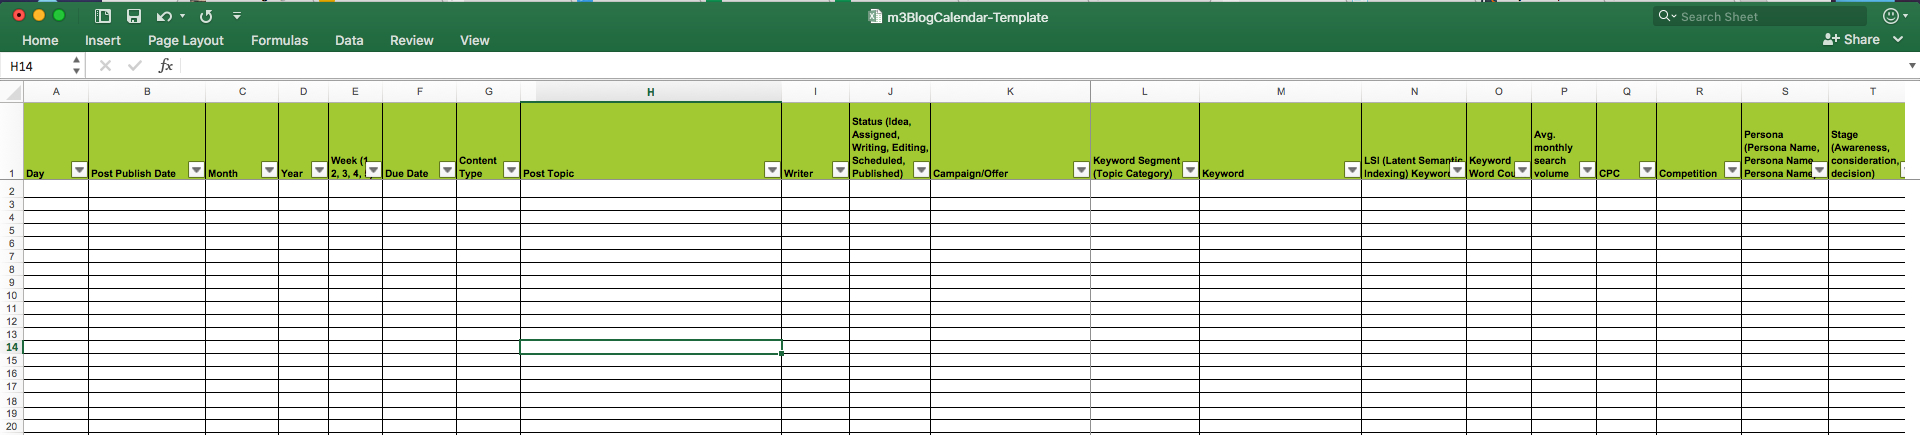 Editorial Calendar Templates For Content Marketing: The pertaining to Convert List Of Dates To Calendar Excel